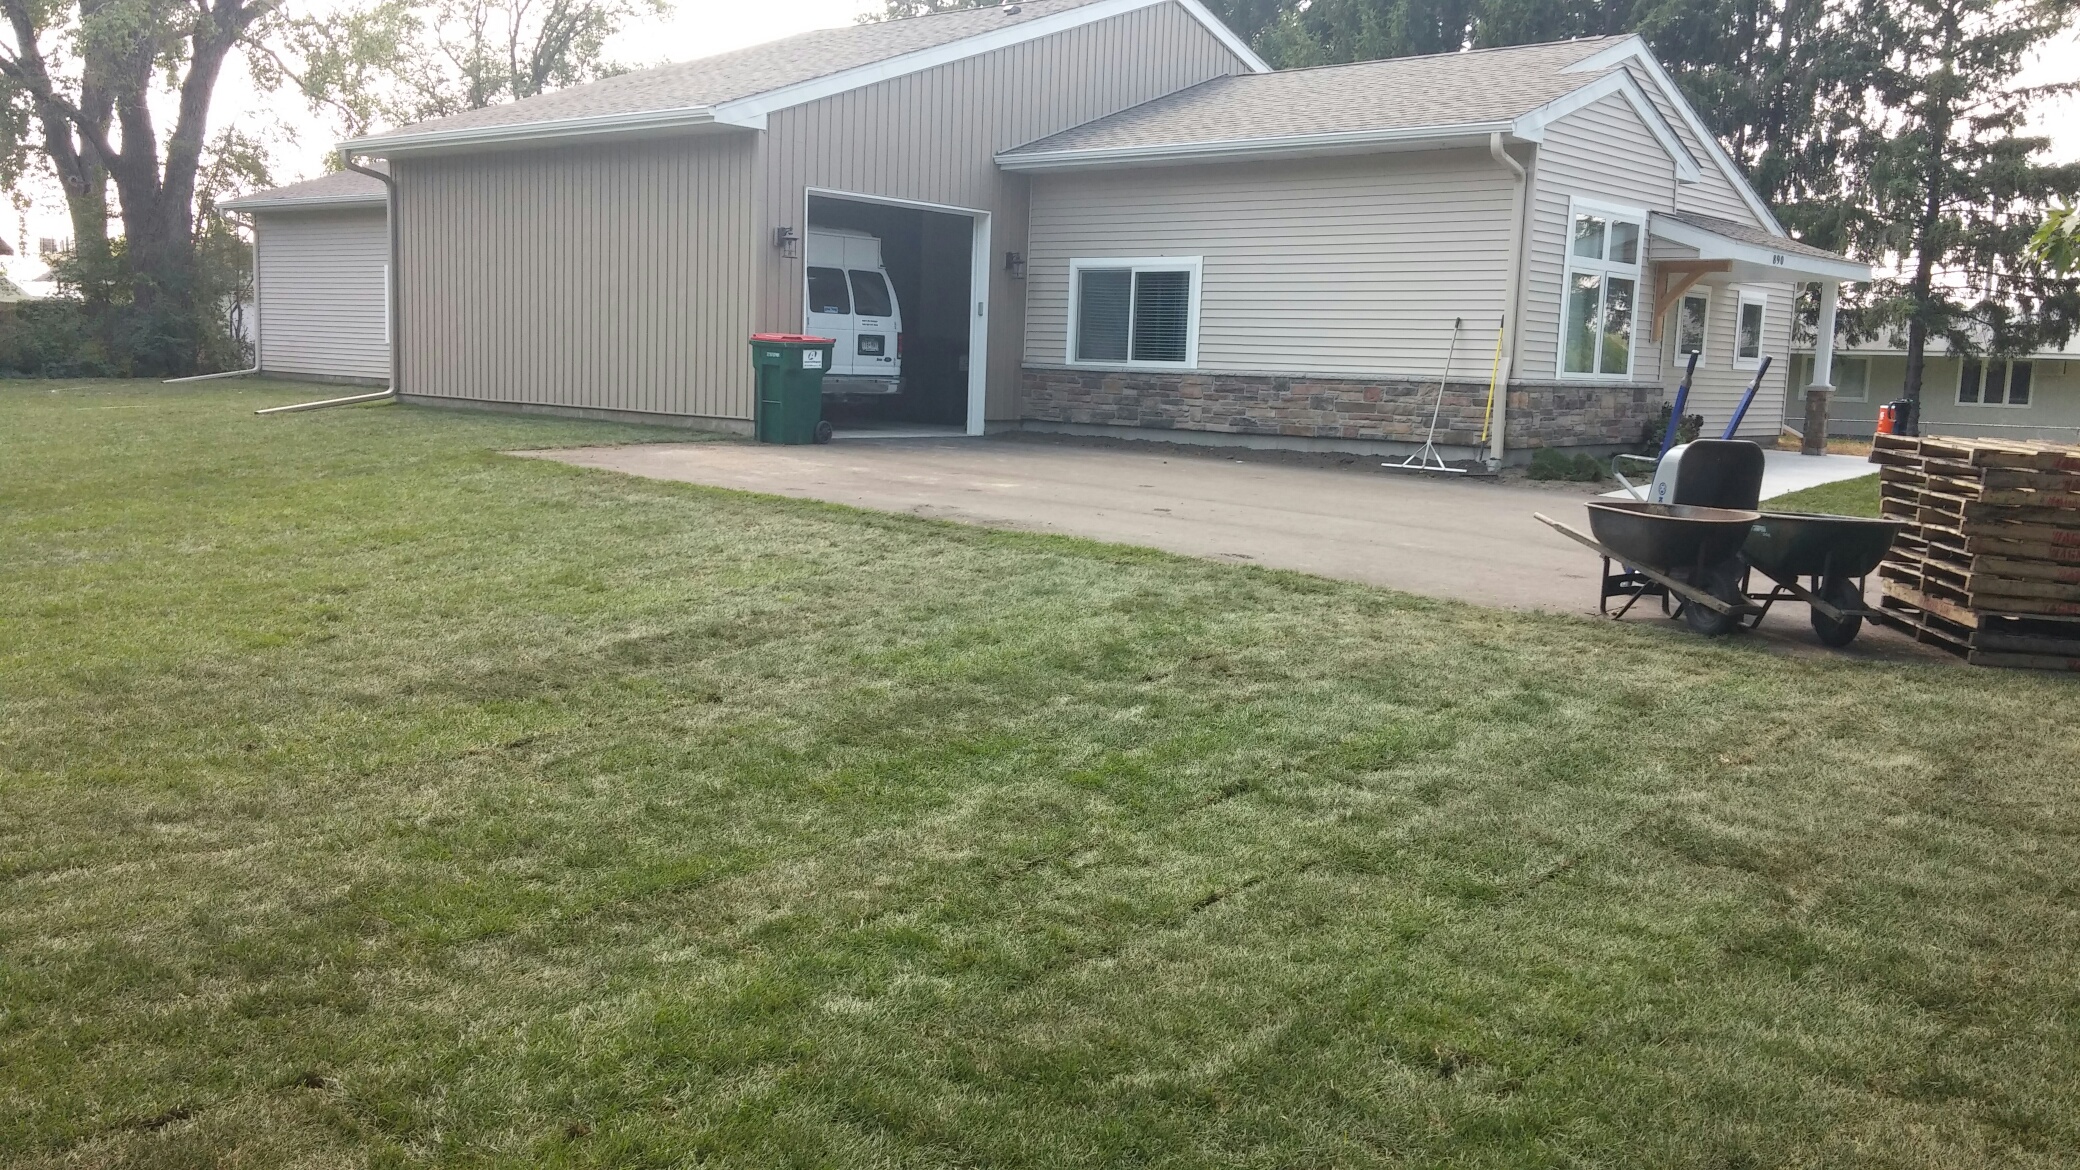 New Sod at Eric's House